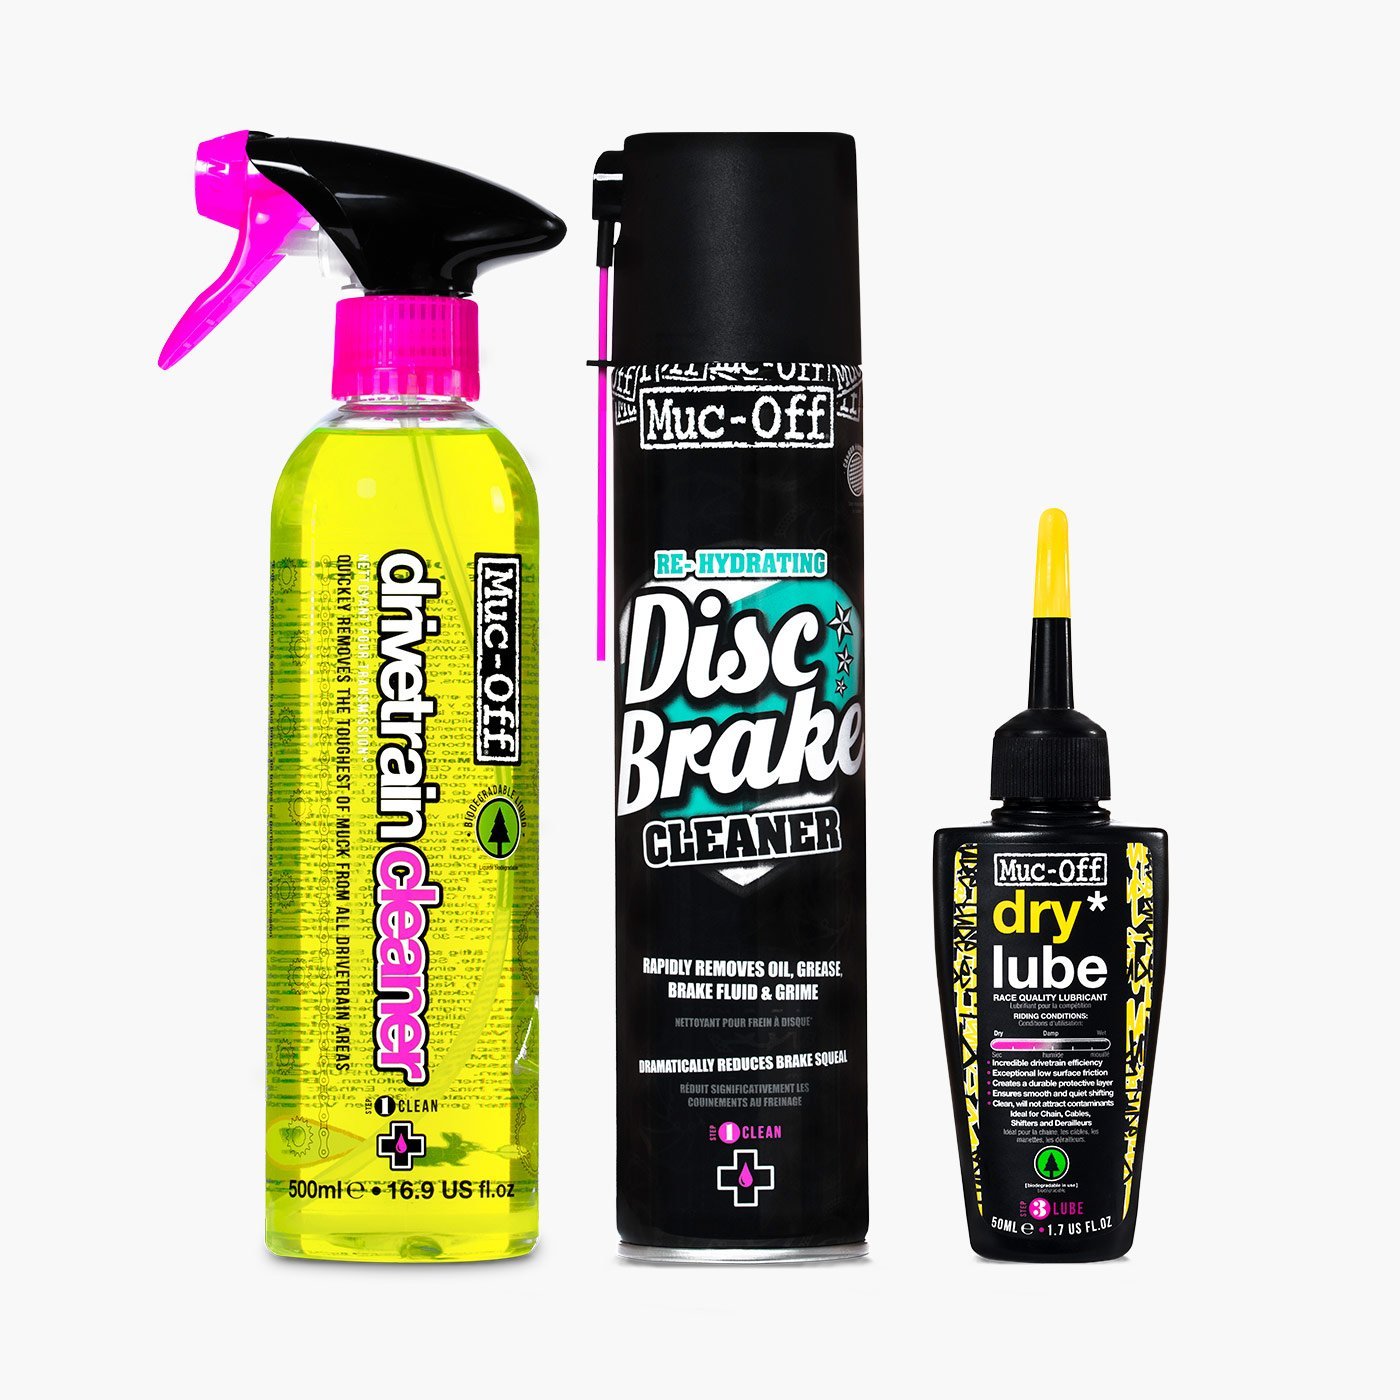 Muc-Off Bio Dry Bike Chain Lube  Chain Cleaning Lubricant and Oil